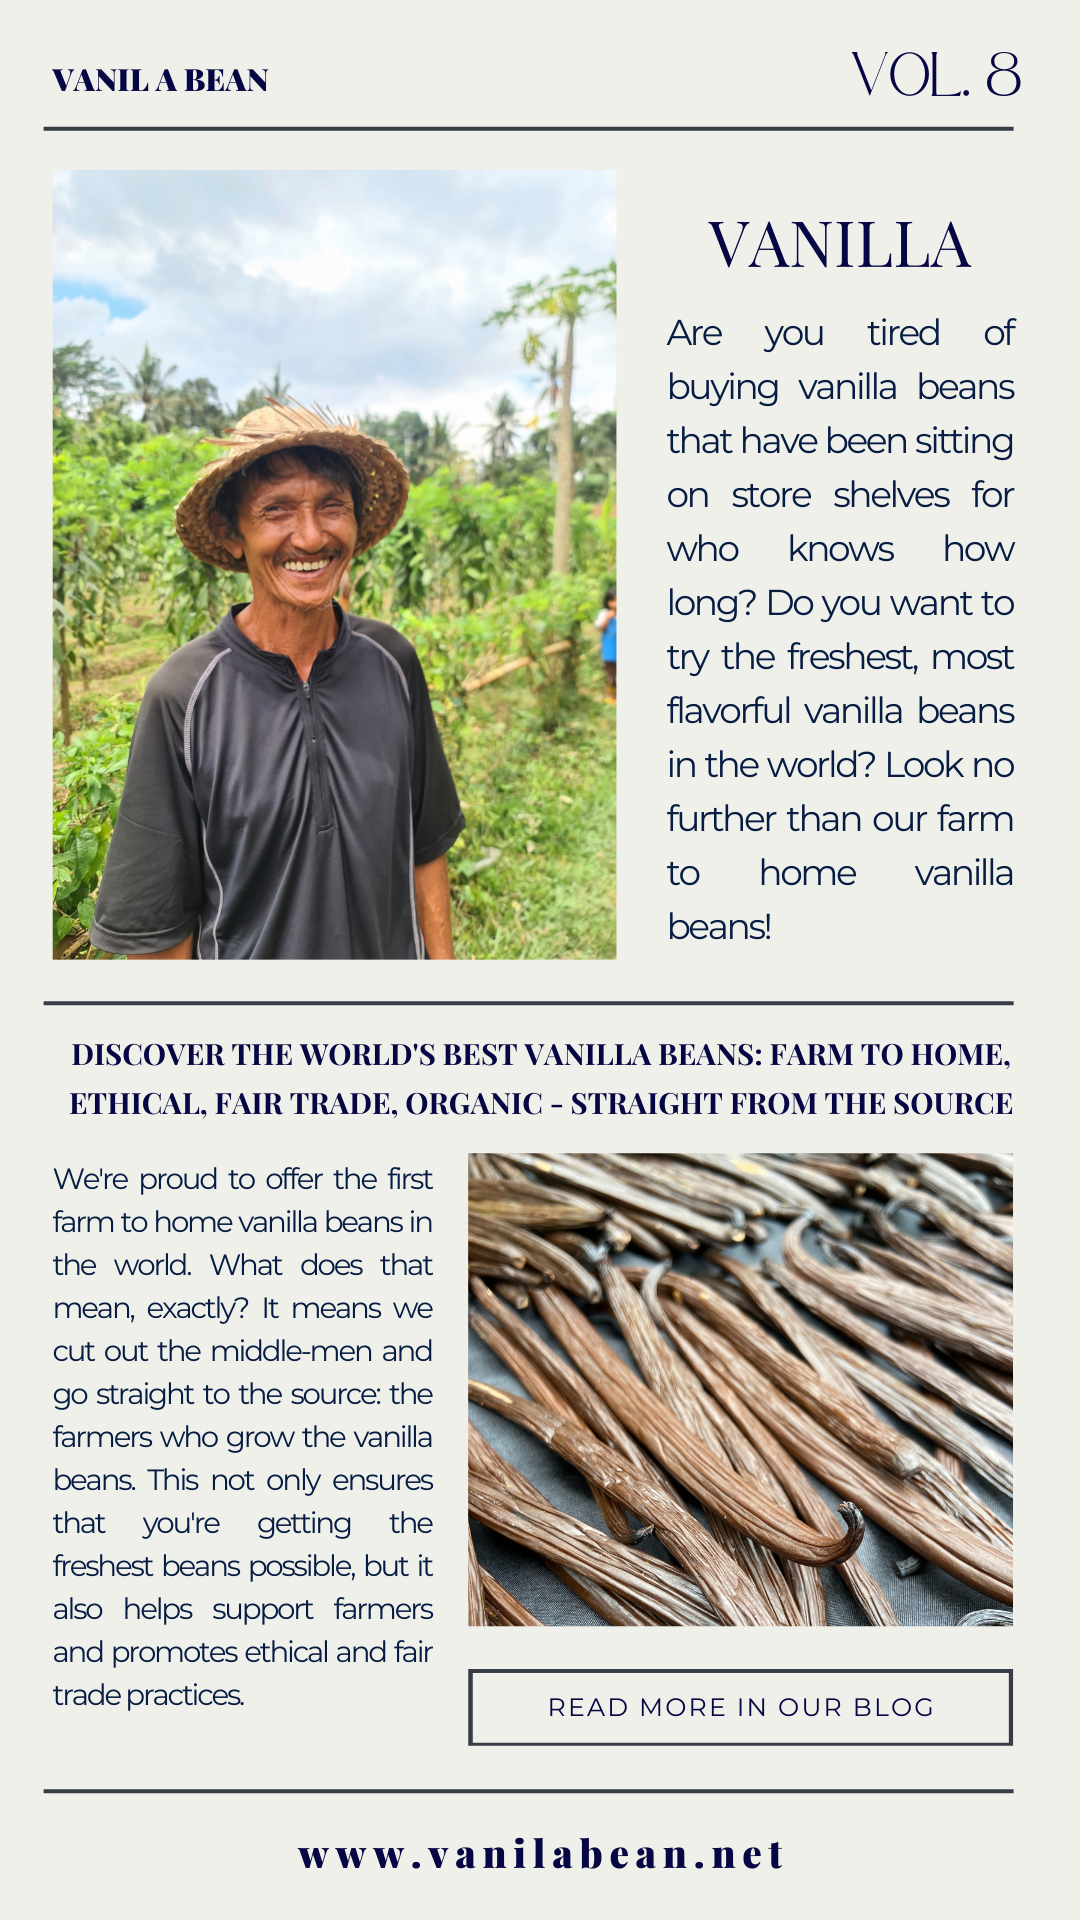 Discover the World's Best Vanilla Beans: Farm to Home, Ethical, Fair Trade, Organic - Straight from the Source